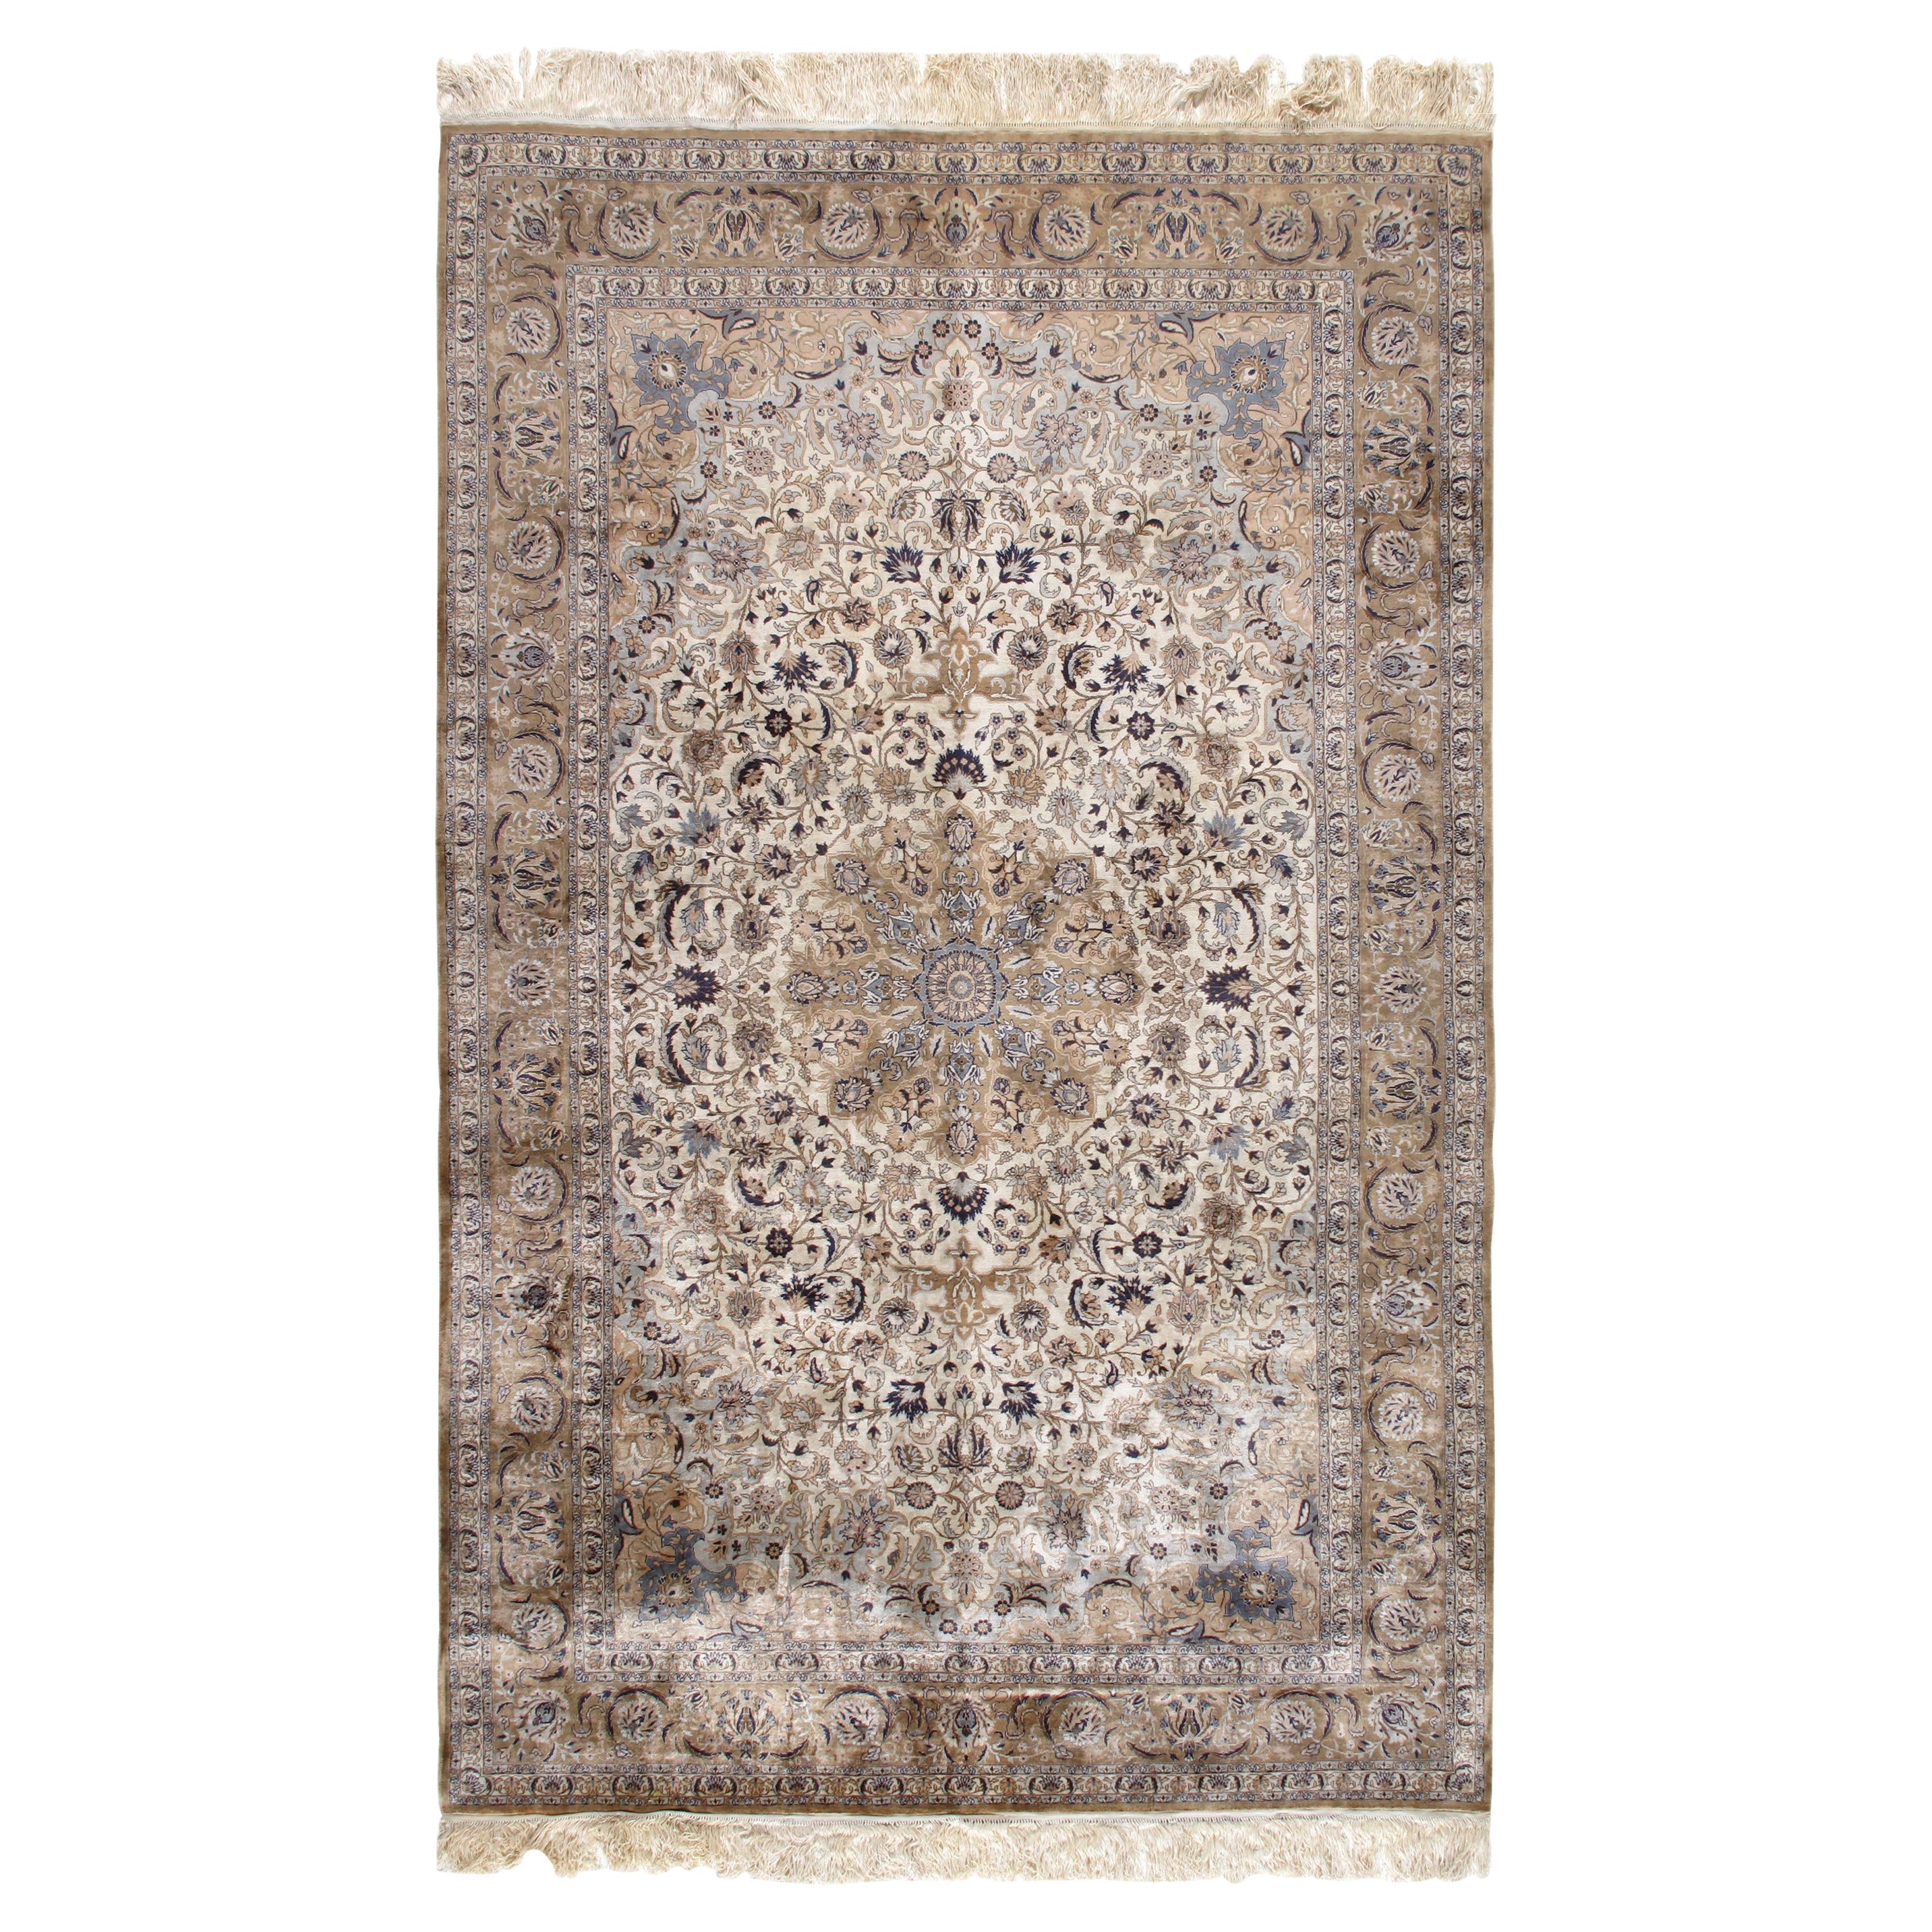 Traditional Qum Chinese Silk Medallion Rug in Ivory, Gold and Blue Colors For Sale